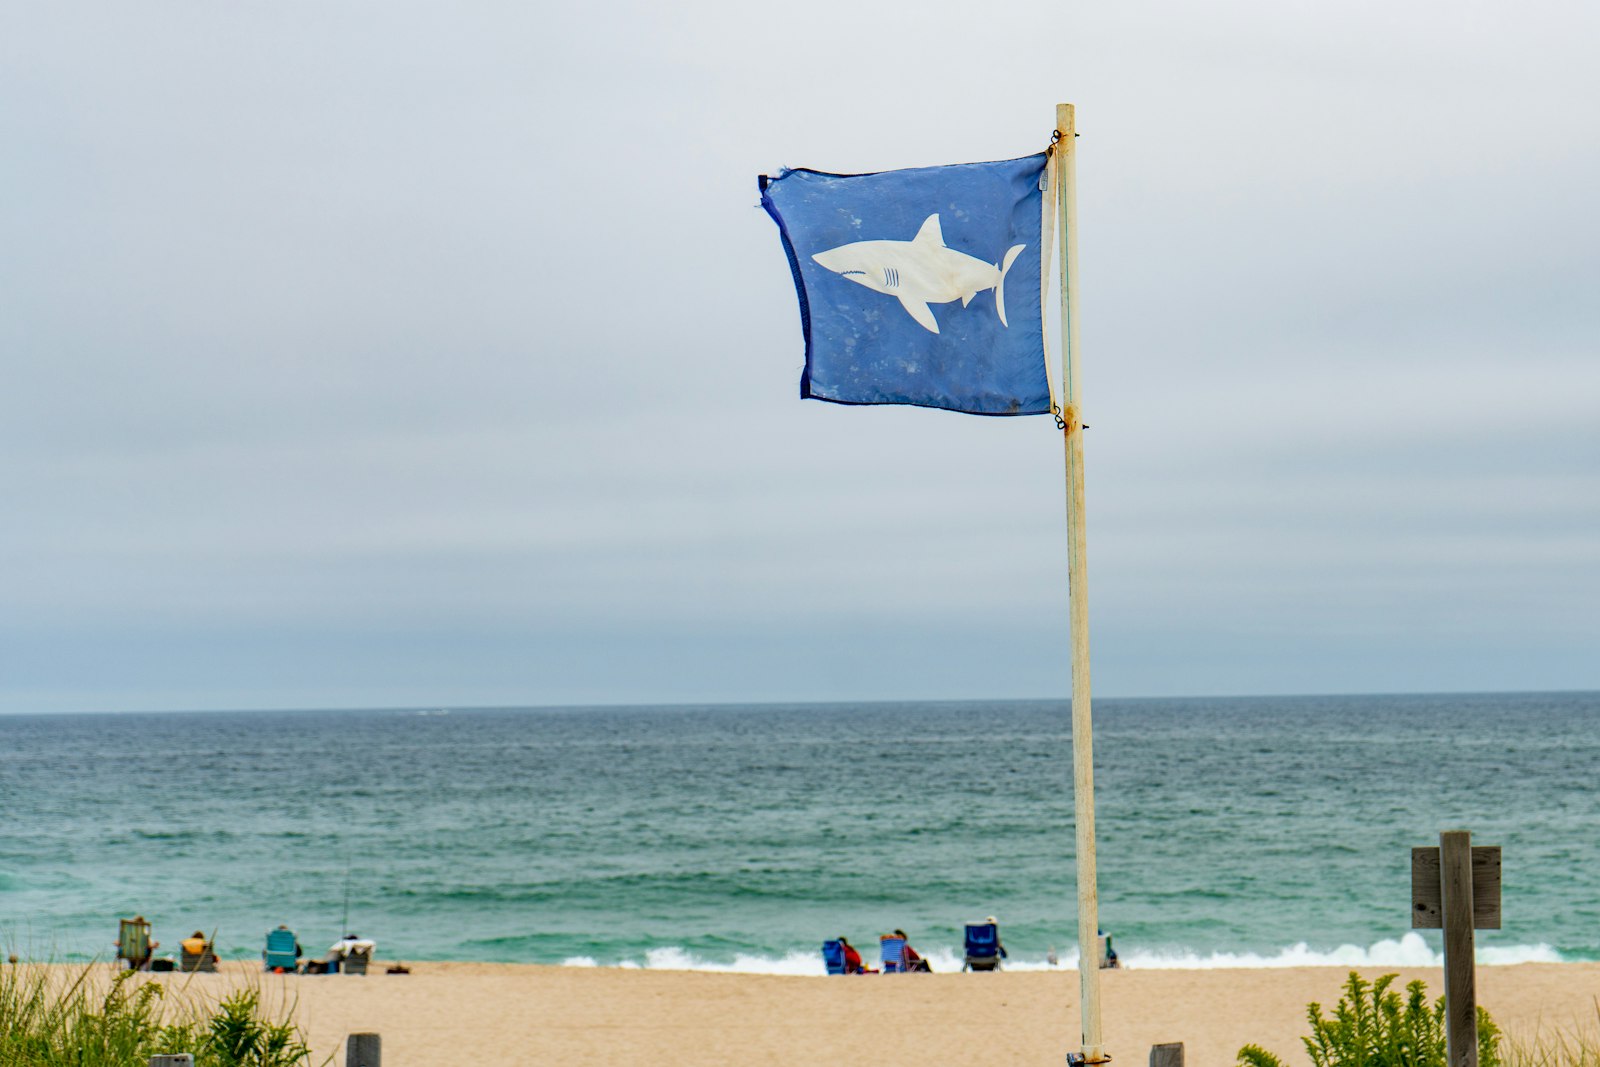 On a beach, two groups of people sit in beach chairs. In the foreground, a blue flag with a white shark silhouette is flying